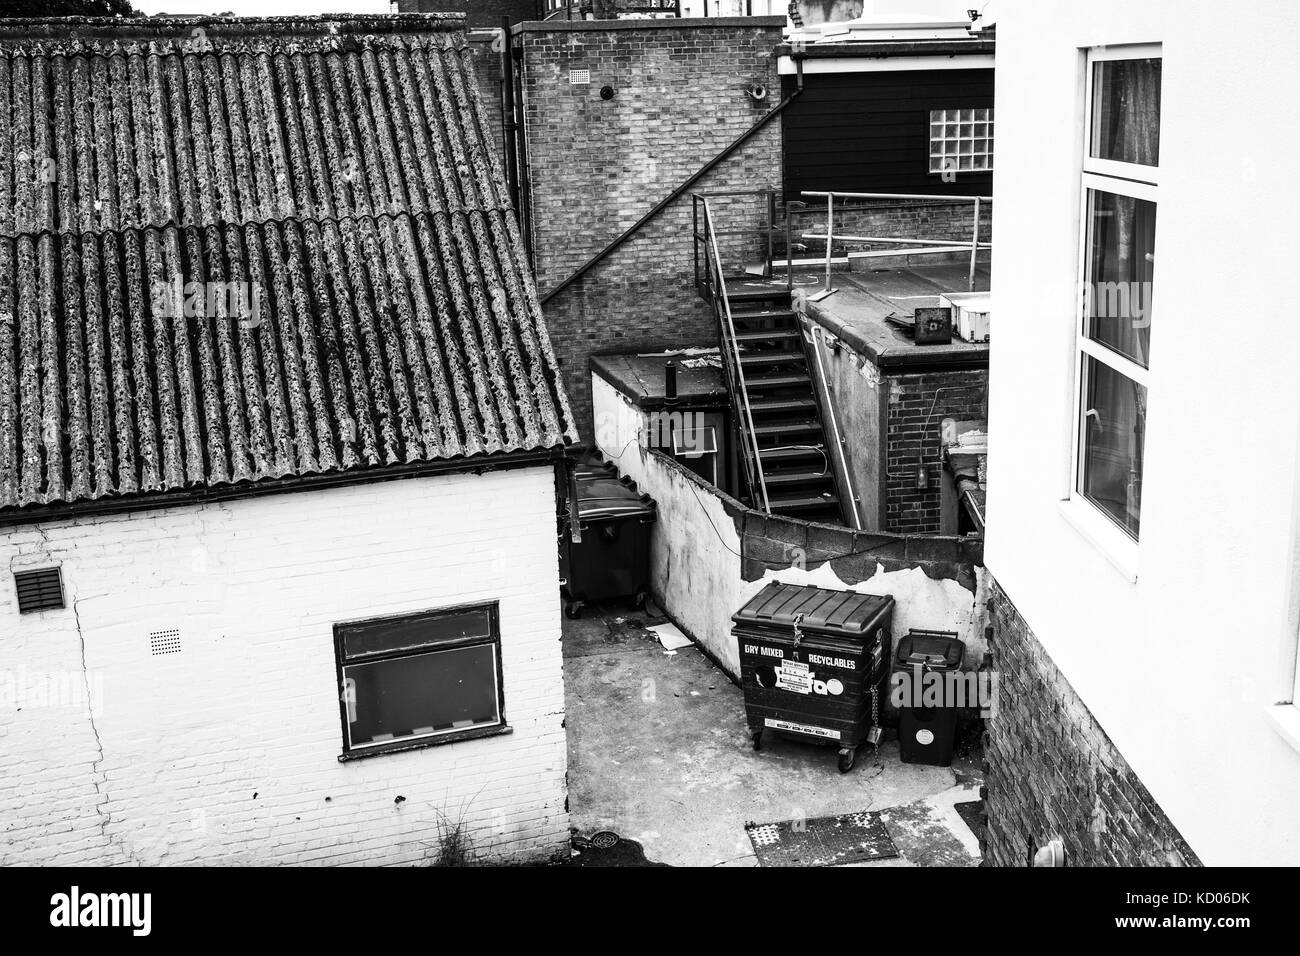 Black and White Monochrome Image of an Urban Alleyway With Wheely Bins in Disrepair and Brick Buildings with No People Stock Photo